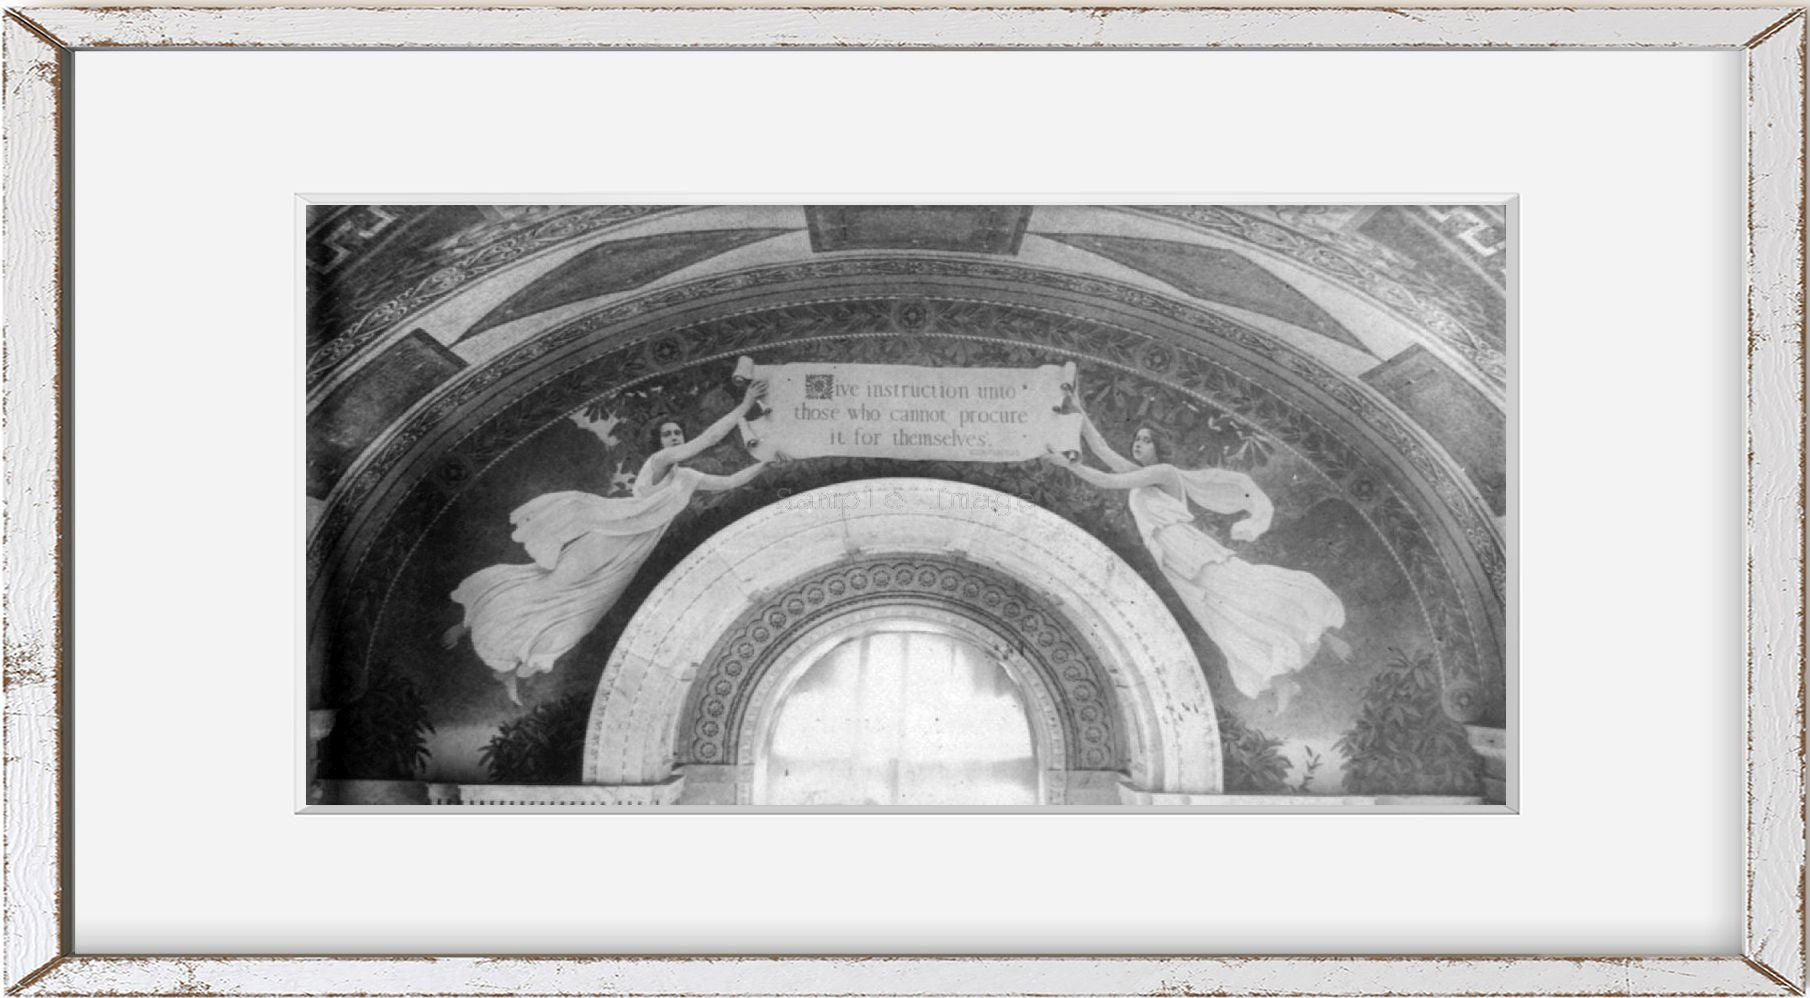 Vintage photograph: Murals in Library of Congress by Chas. Sprague Pearce - "The